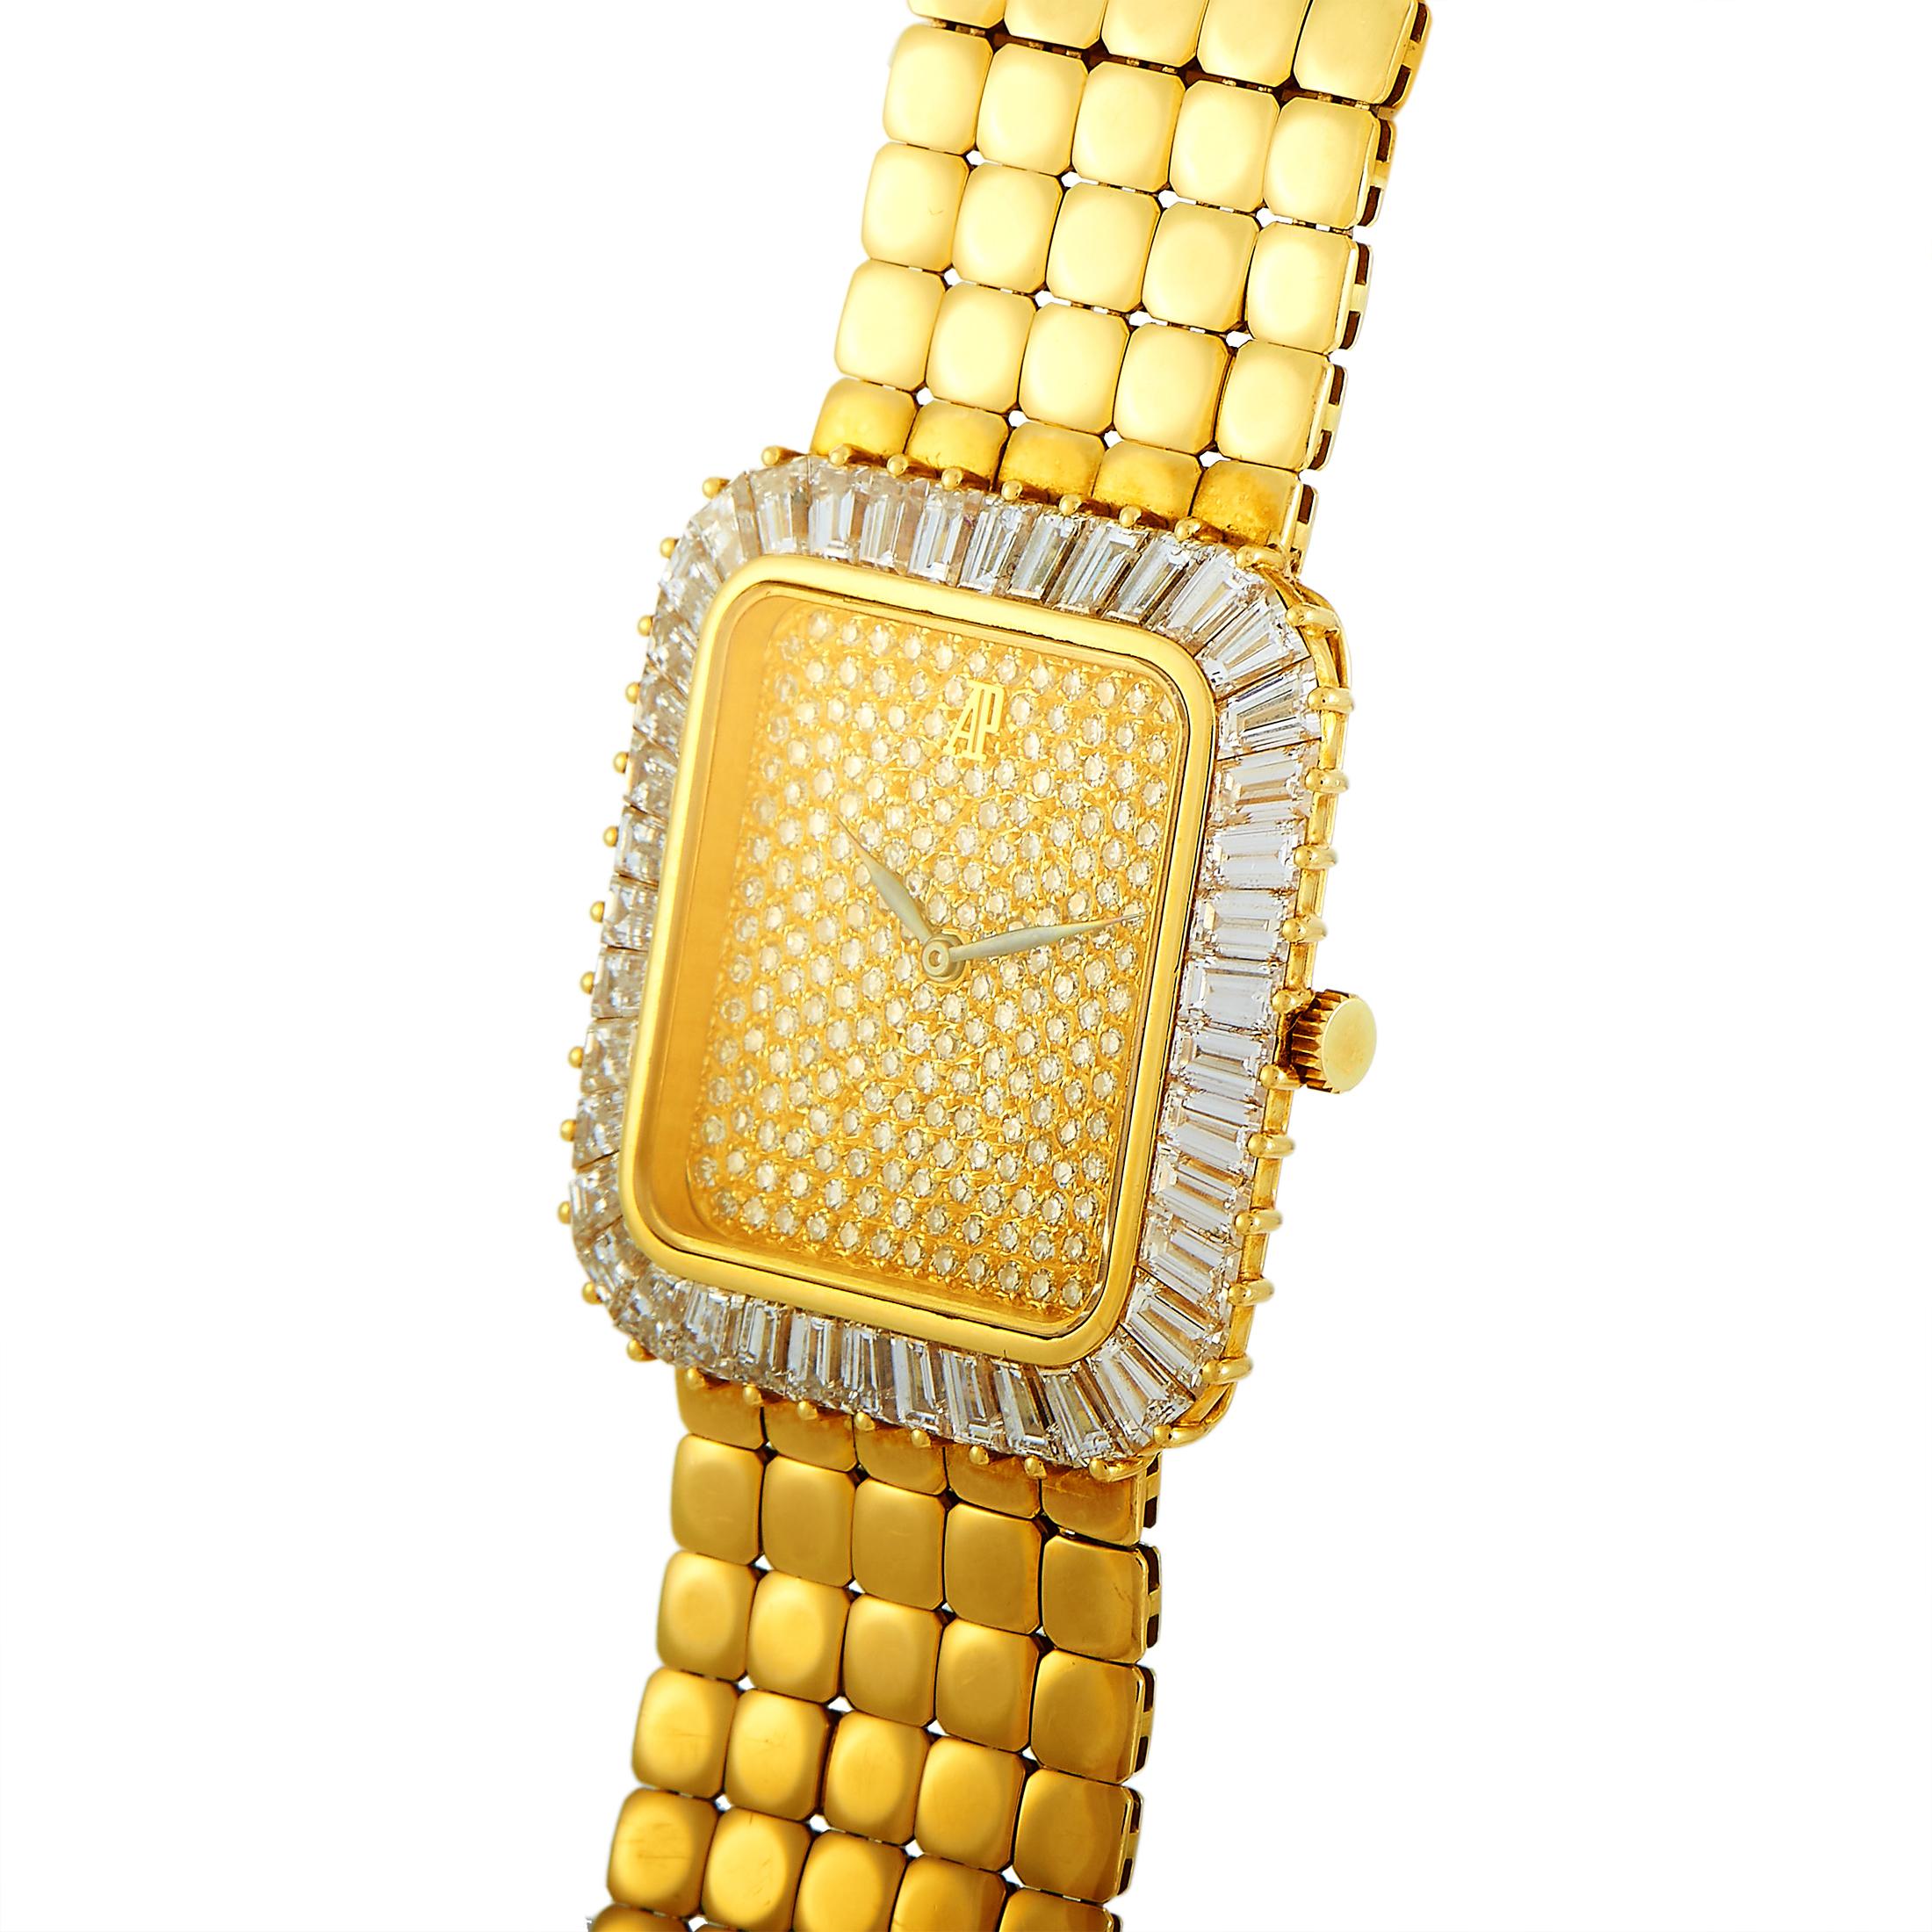 This Audemars Piguet vintage timepiece comes with an 18K yellow gold case embellished with baguette diamonds set on the bezel. The case is presented on an 18K yellow gold bracelet. The dial is paved with diamonds and features central hours and